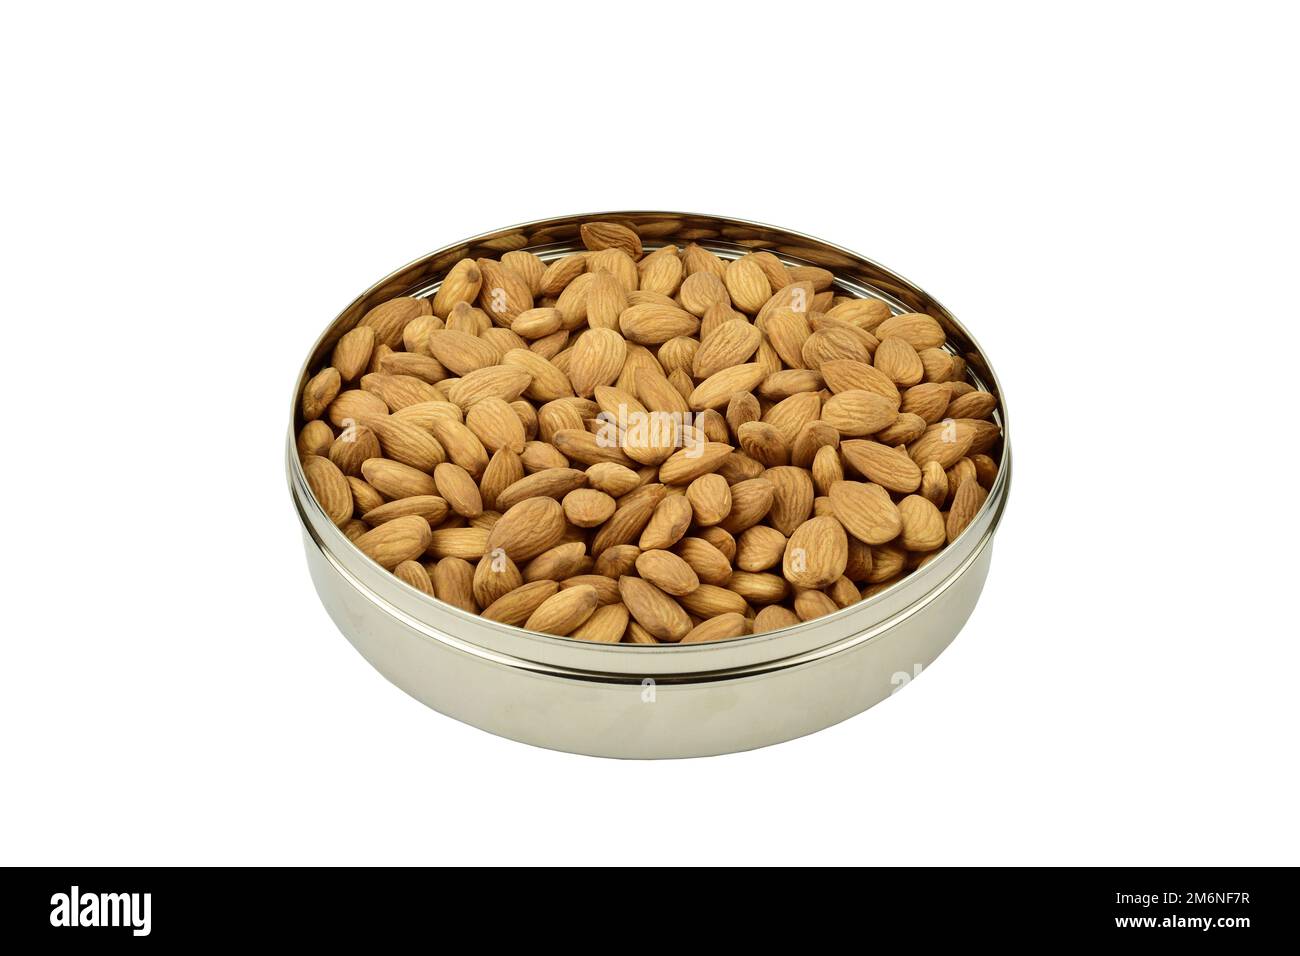 Almond in round steel box isolated on white background with clipping path Stock Photo